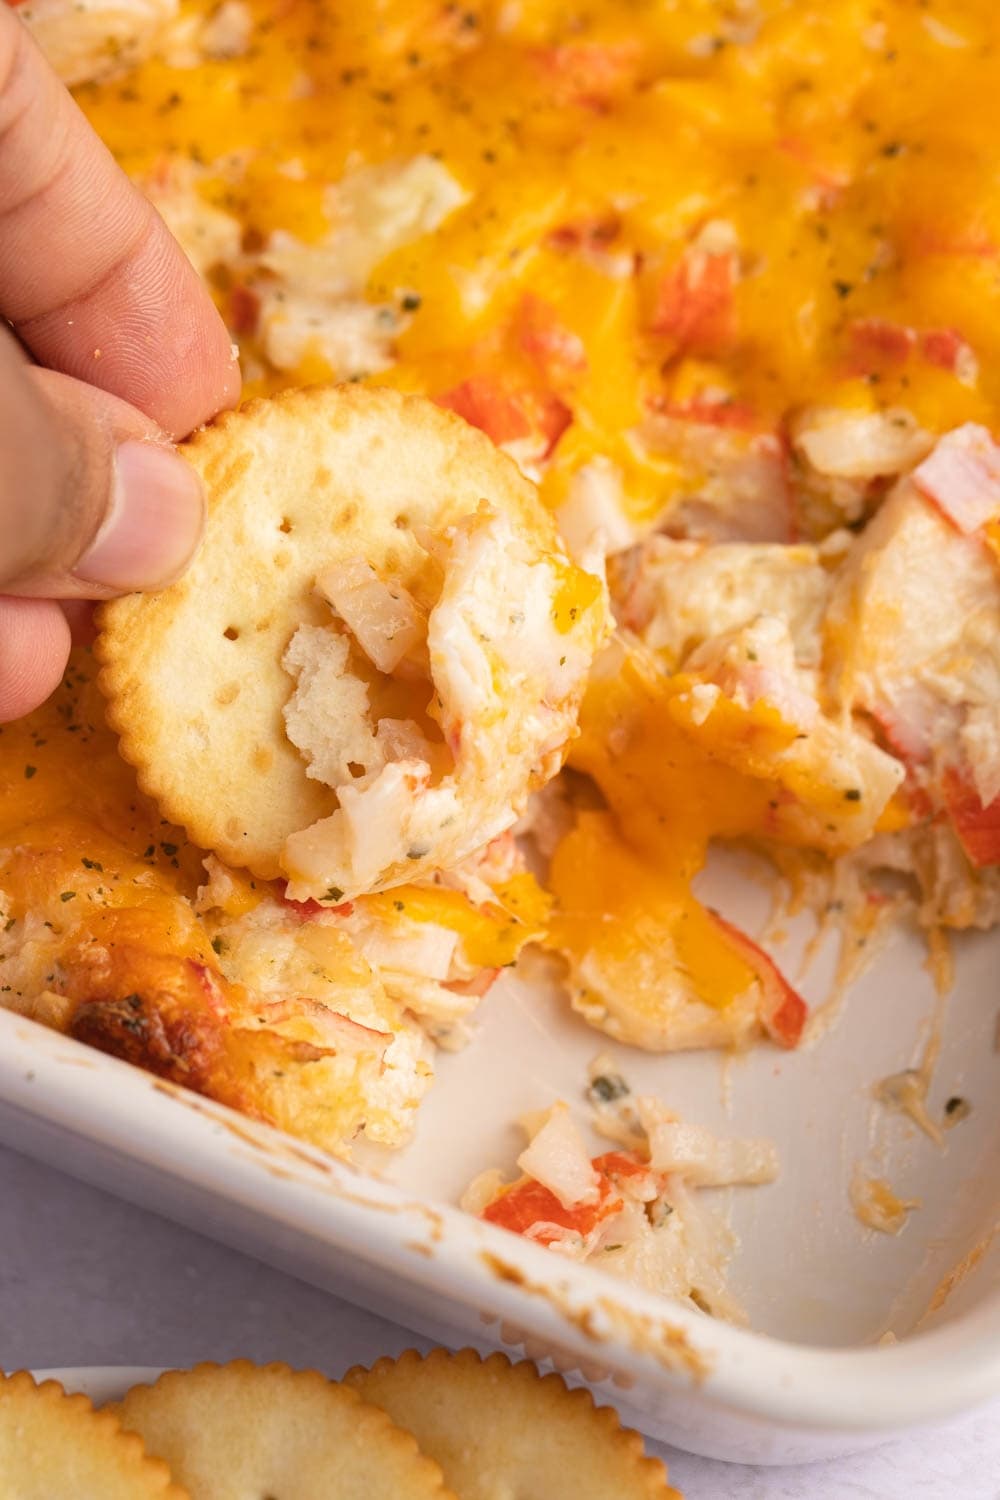 Dipping a Biscuit in a Cheesy Crab Casserole